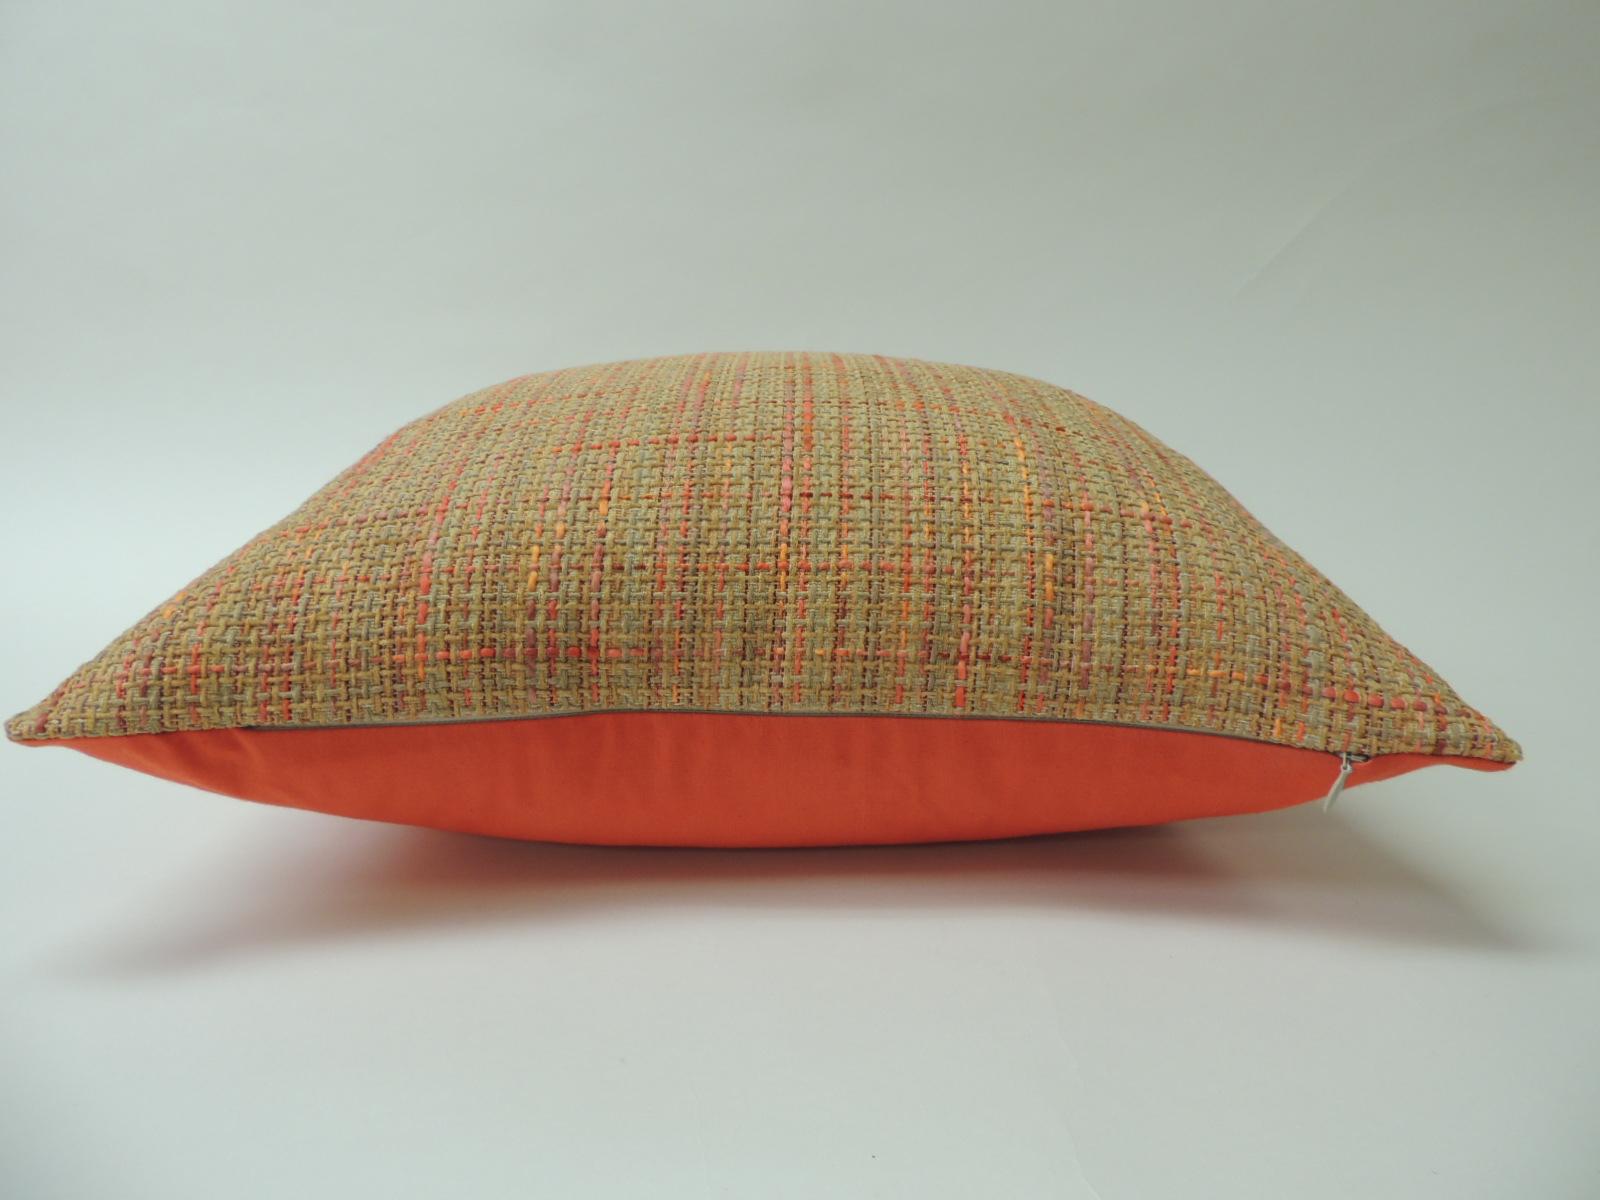 Orange tweet decorative pillow
Orange cotton and linen modern tweet, square throw customizable decorative pillow with bright Palm beach orange solid cotton backing and self-welt. The price on the pillow includes a custom ATG feather/down insert.